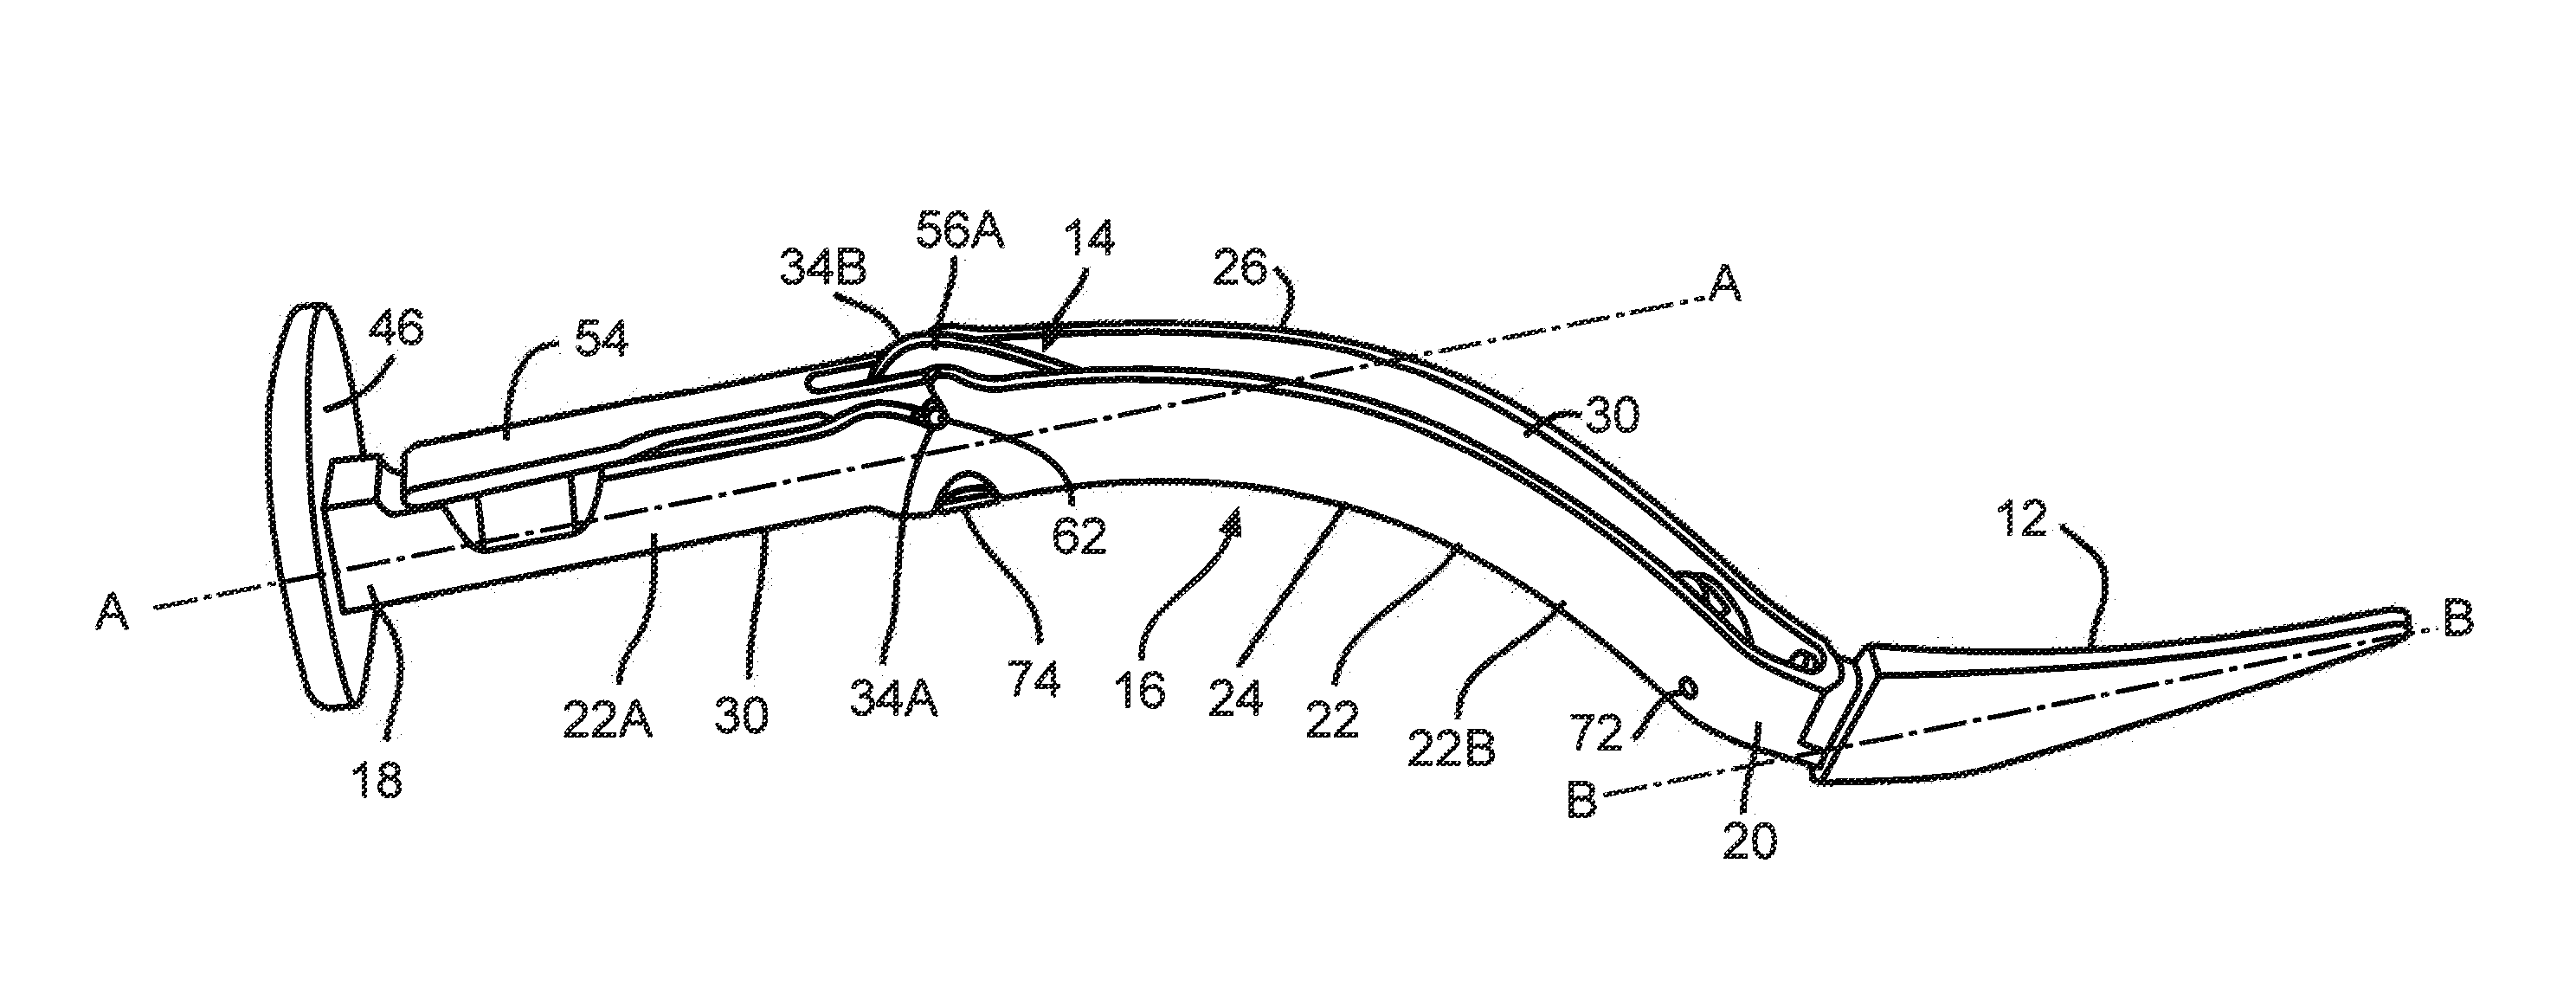 Double Offset Surgical Tool Handle Assembly Having A Locking Linkage Aligned Along Two Different Planes